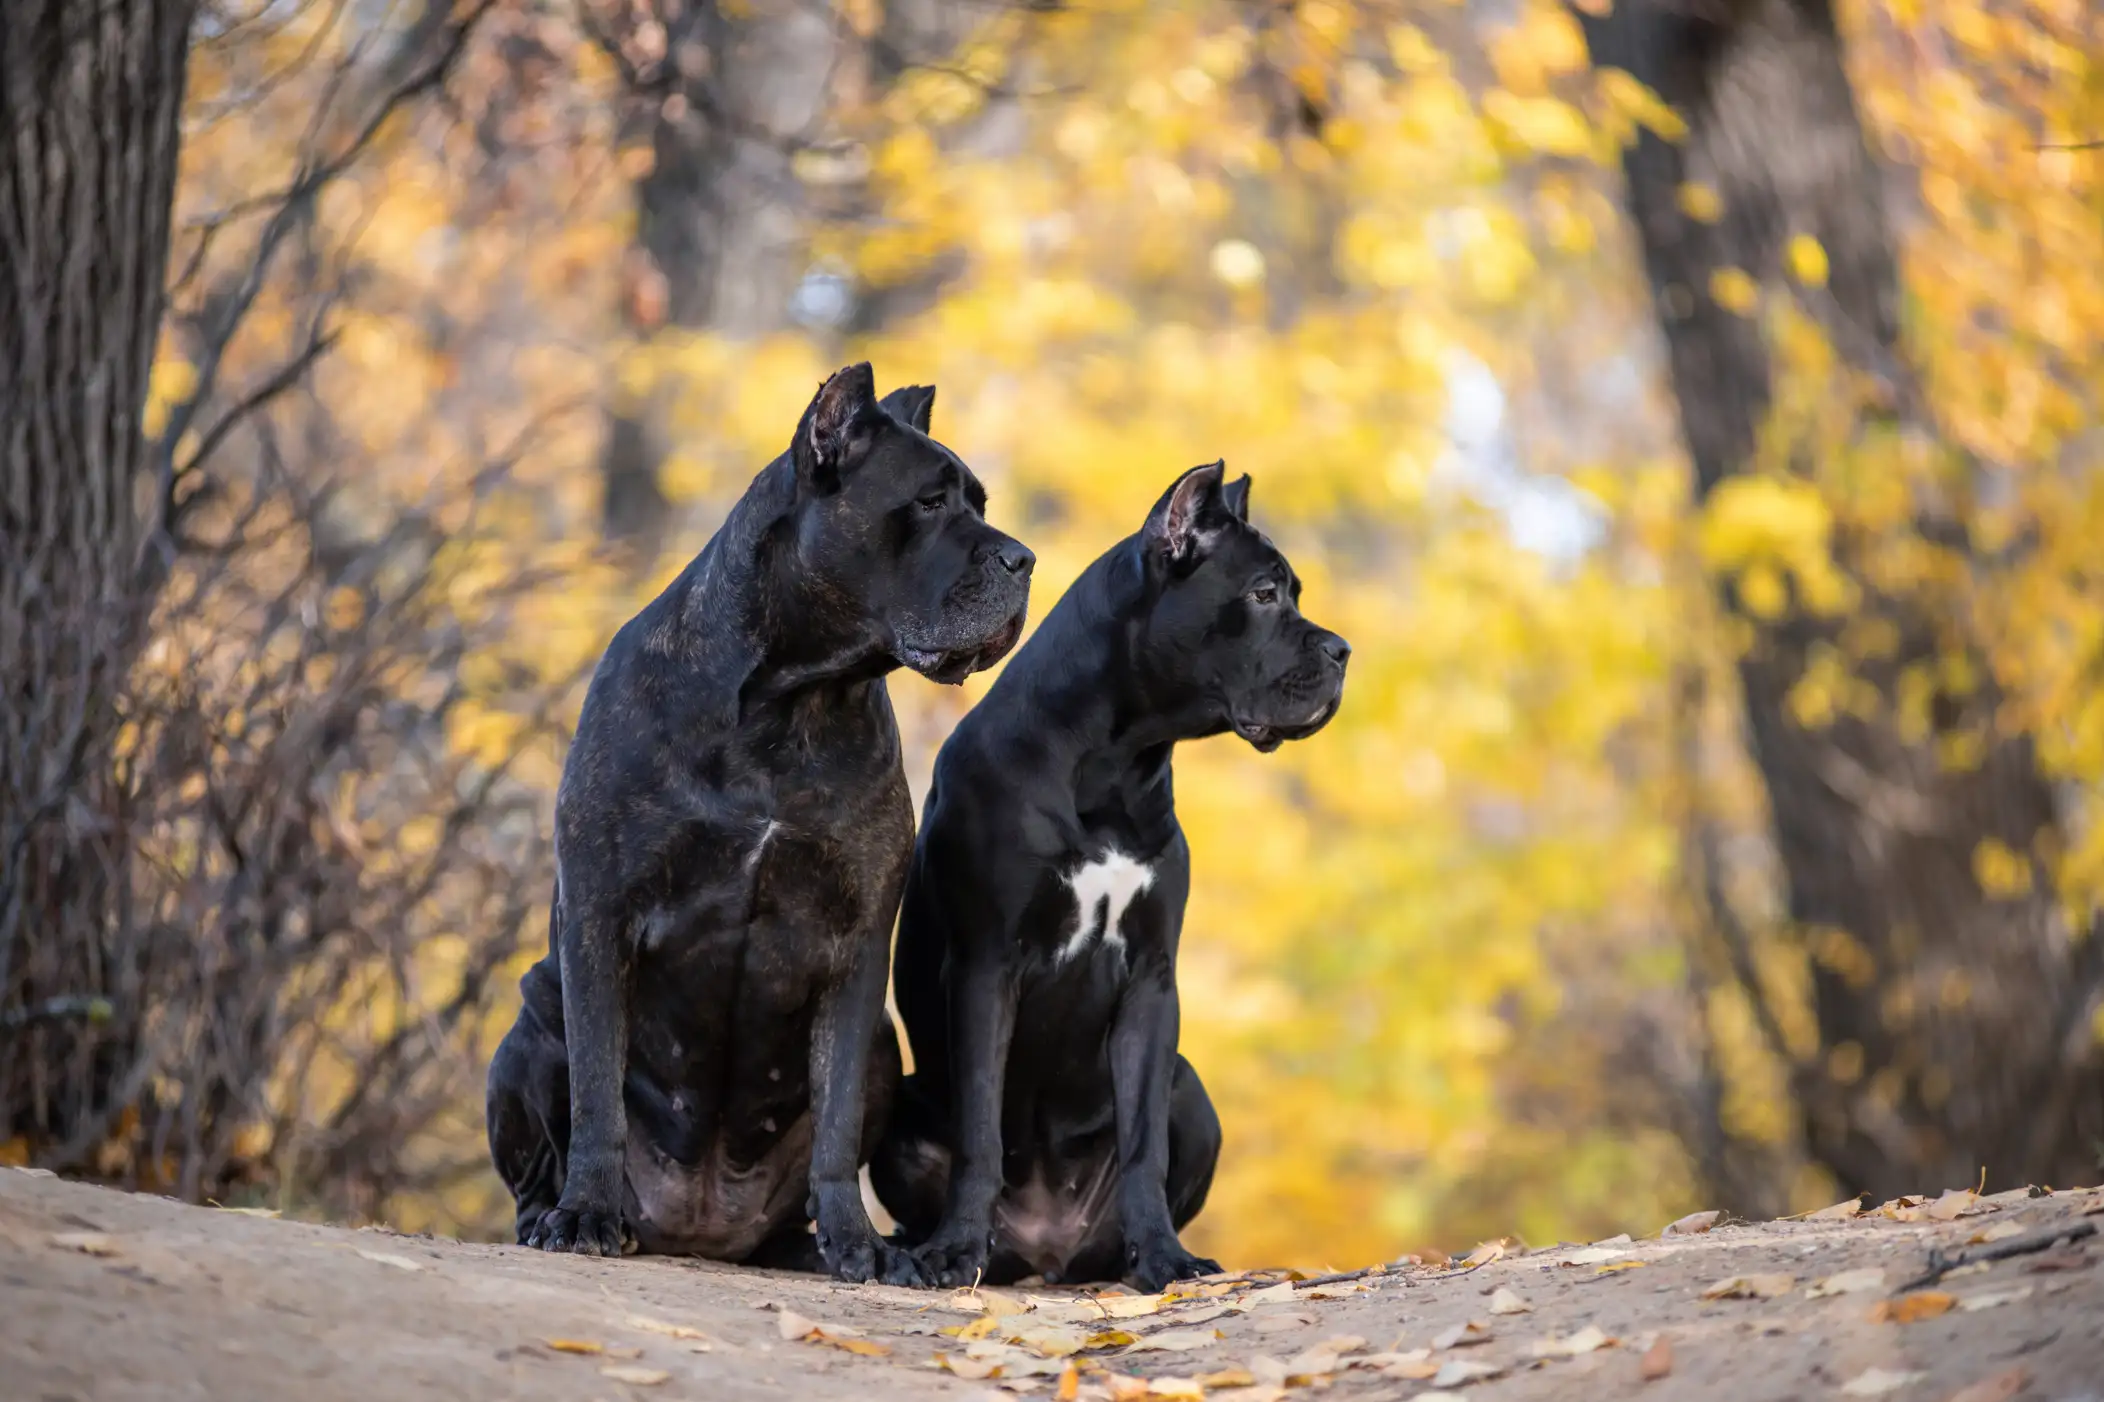 Two Cane Corso dogs are sitting in the autumn park